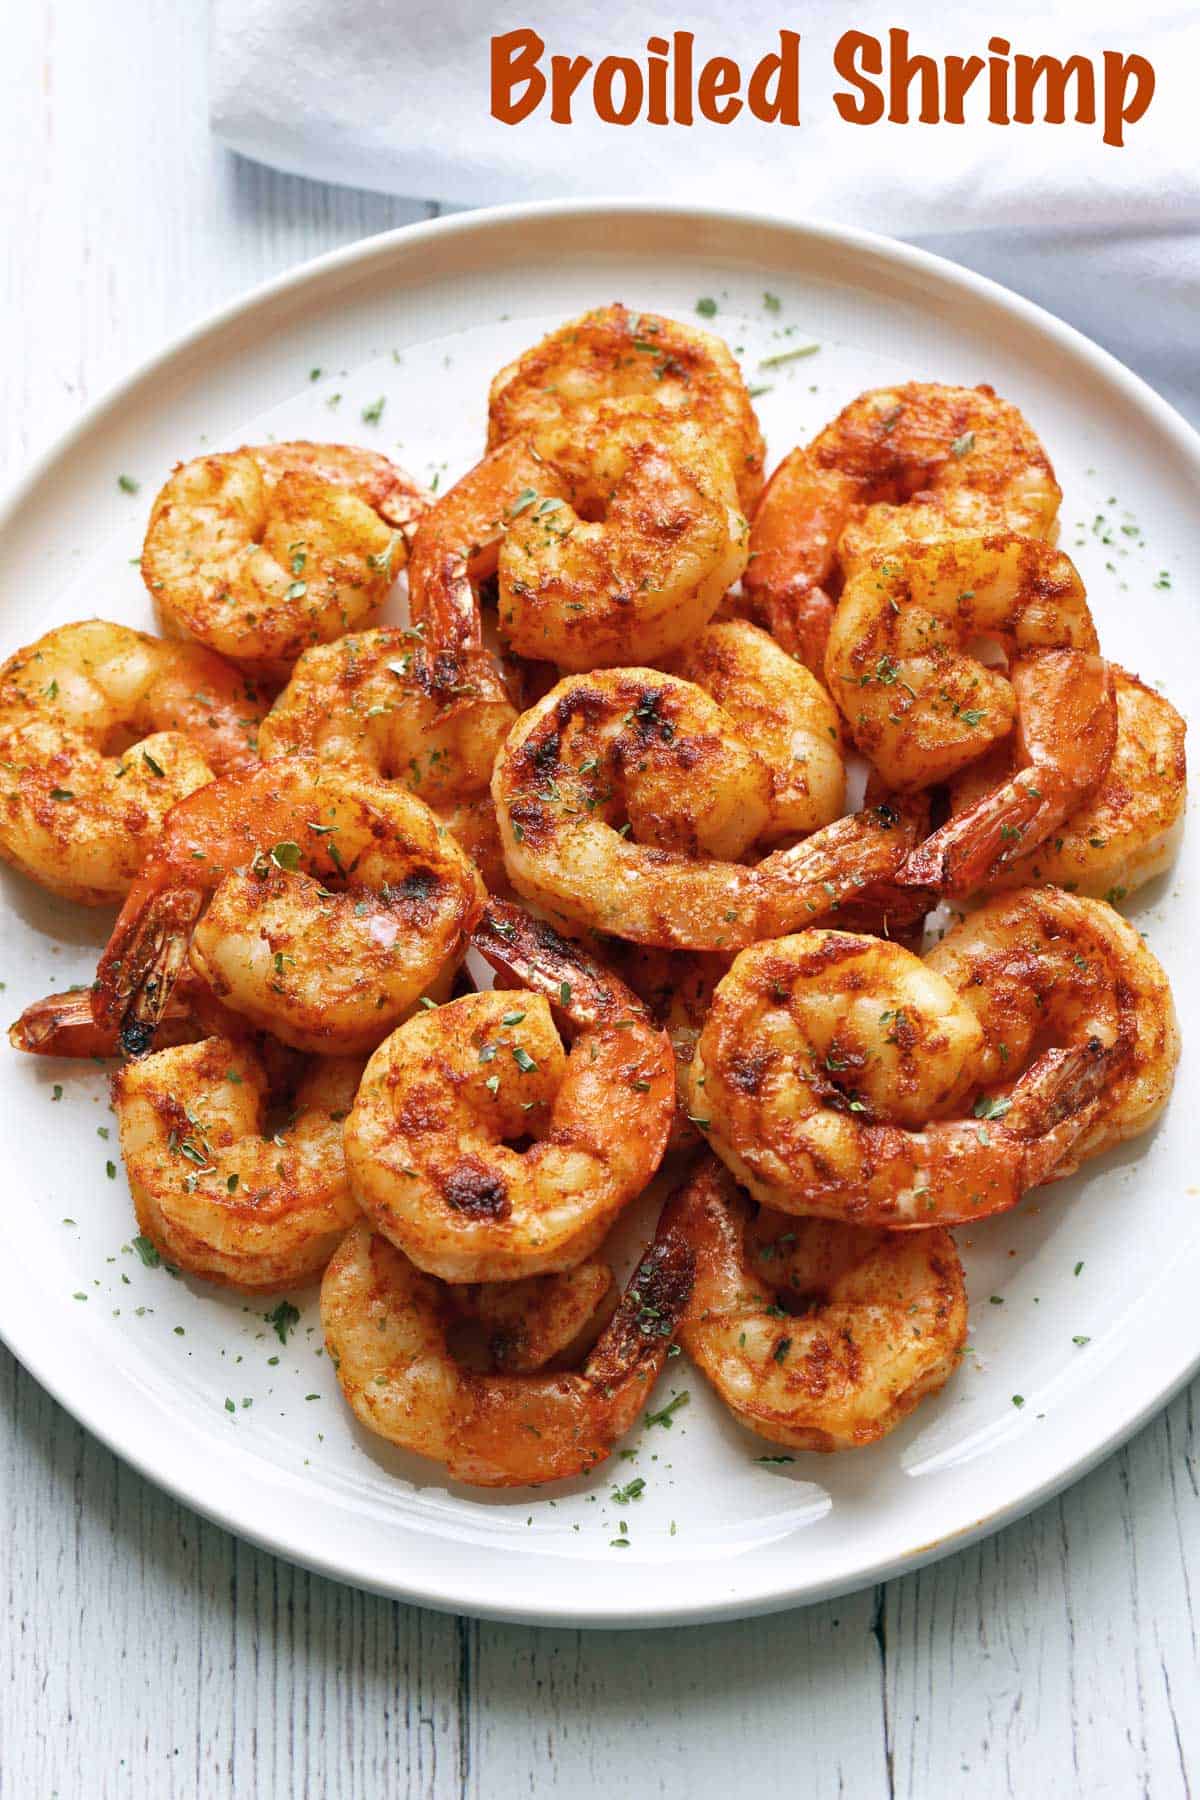 Broiled shrimp with cajun seasoning, served on a white plate.